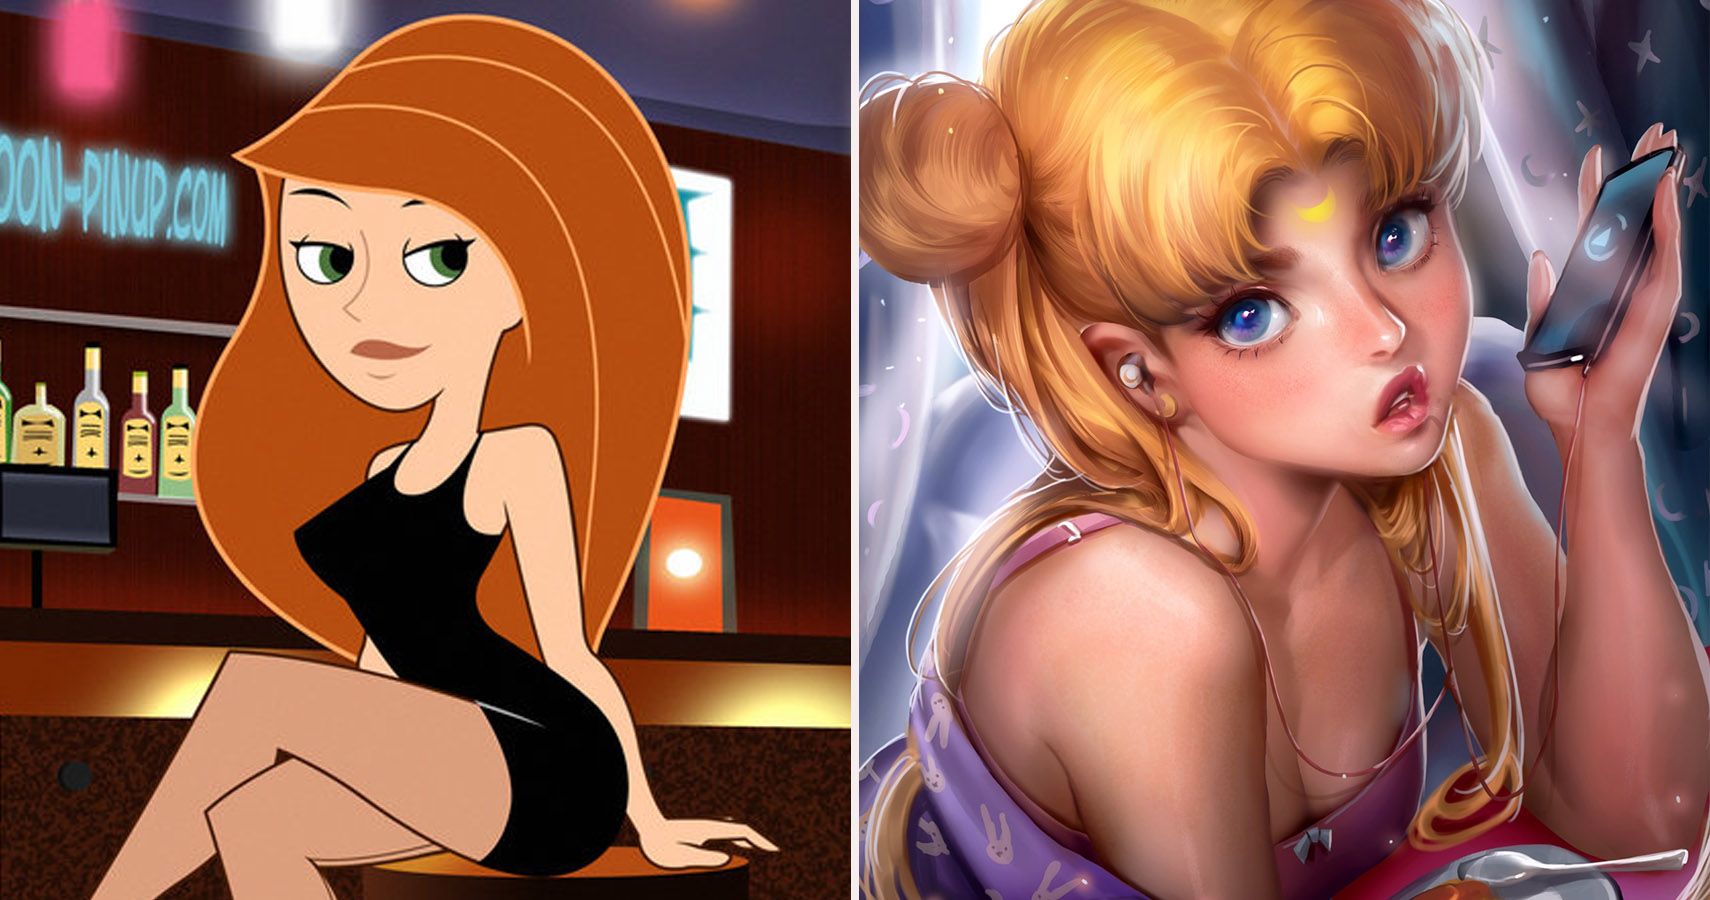 25 “All Grown Up” Versions Of Your Favorite Cartoon Characters